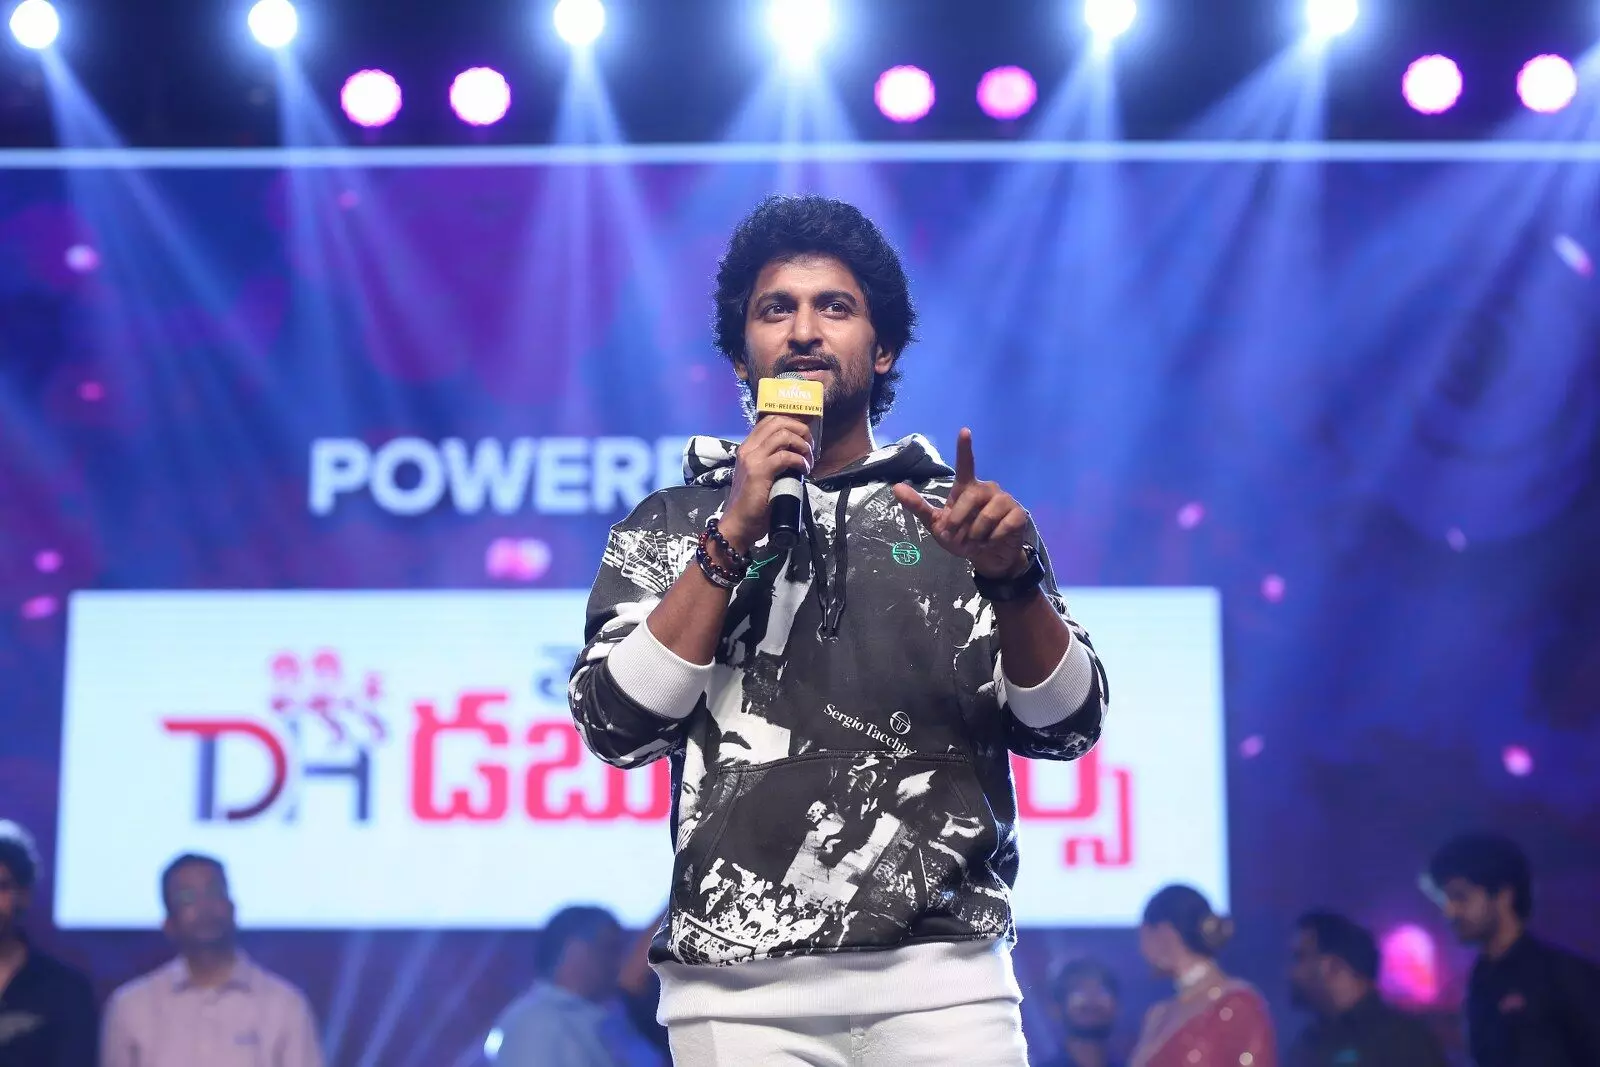 The energy in ‘Hi Nanna’ is addictive: Nani at musical night event